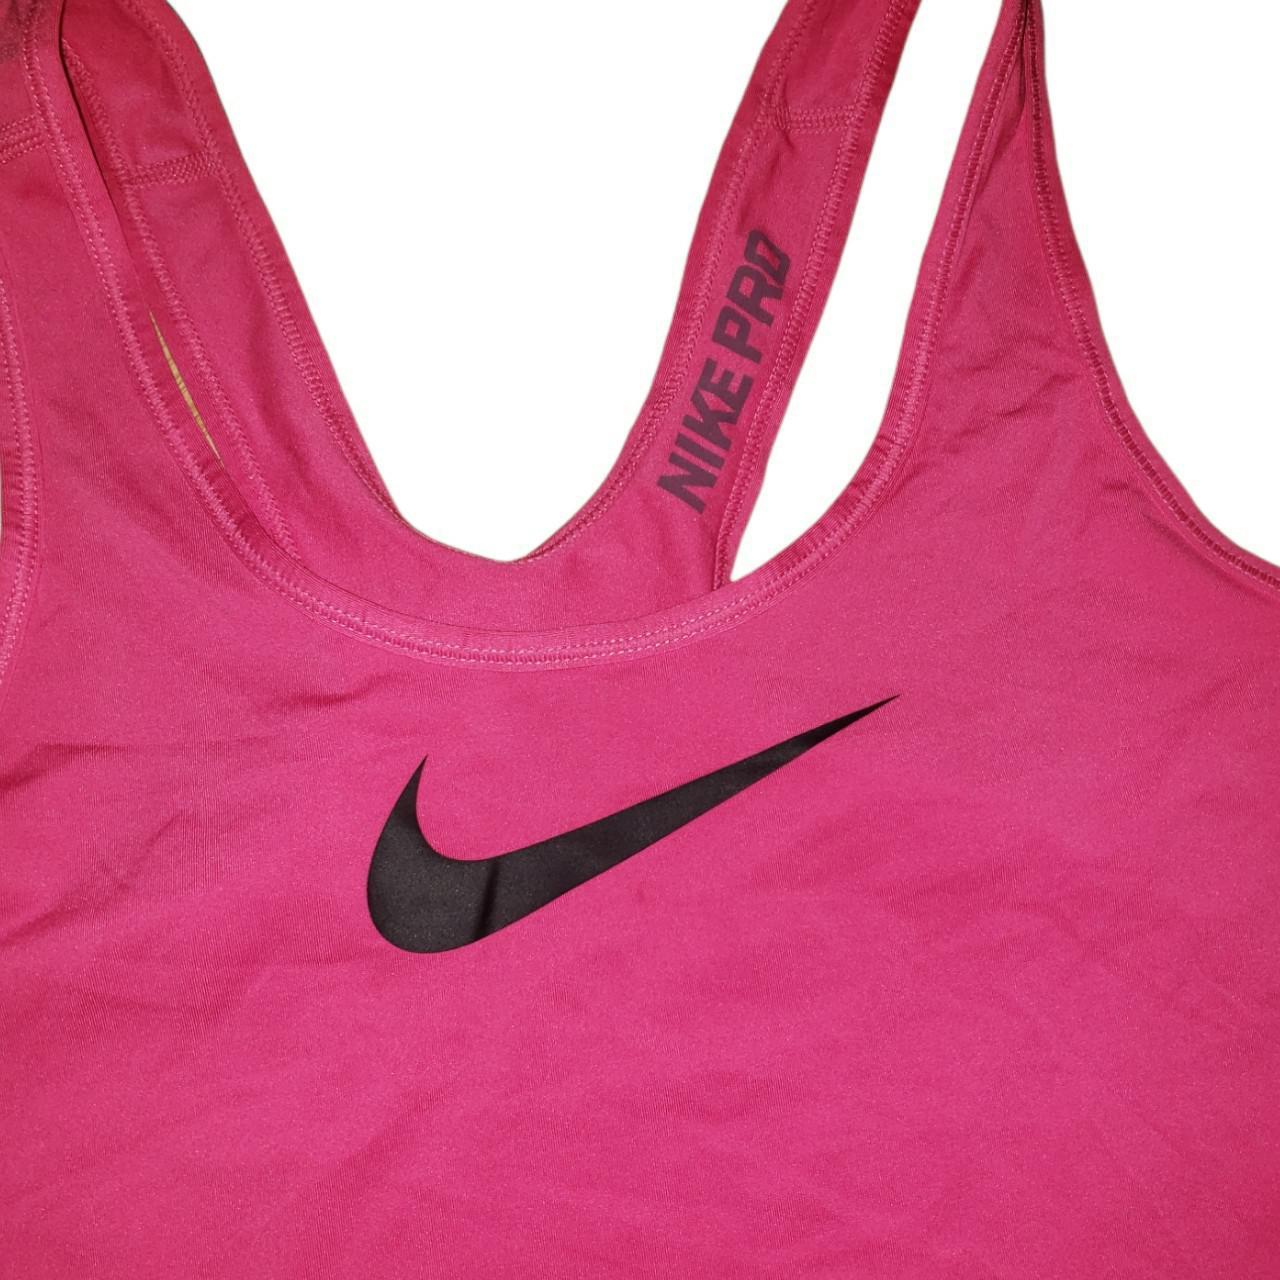 Product Image 4 - Nike Pro Pink Tank Top
Size